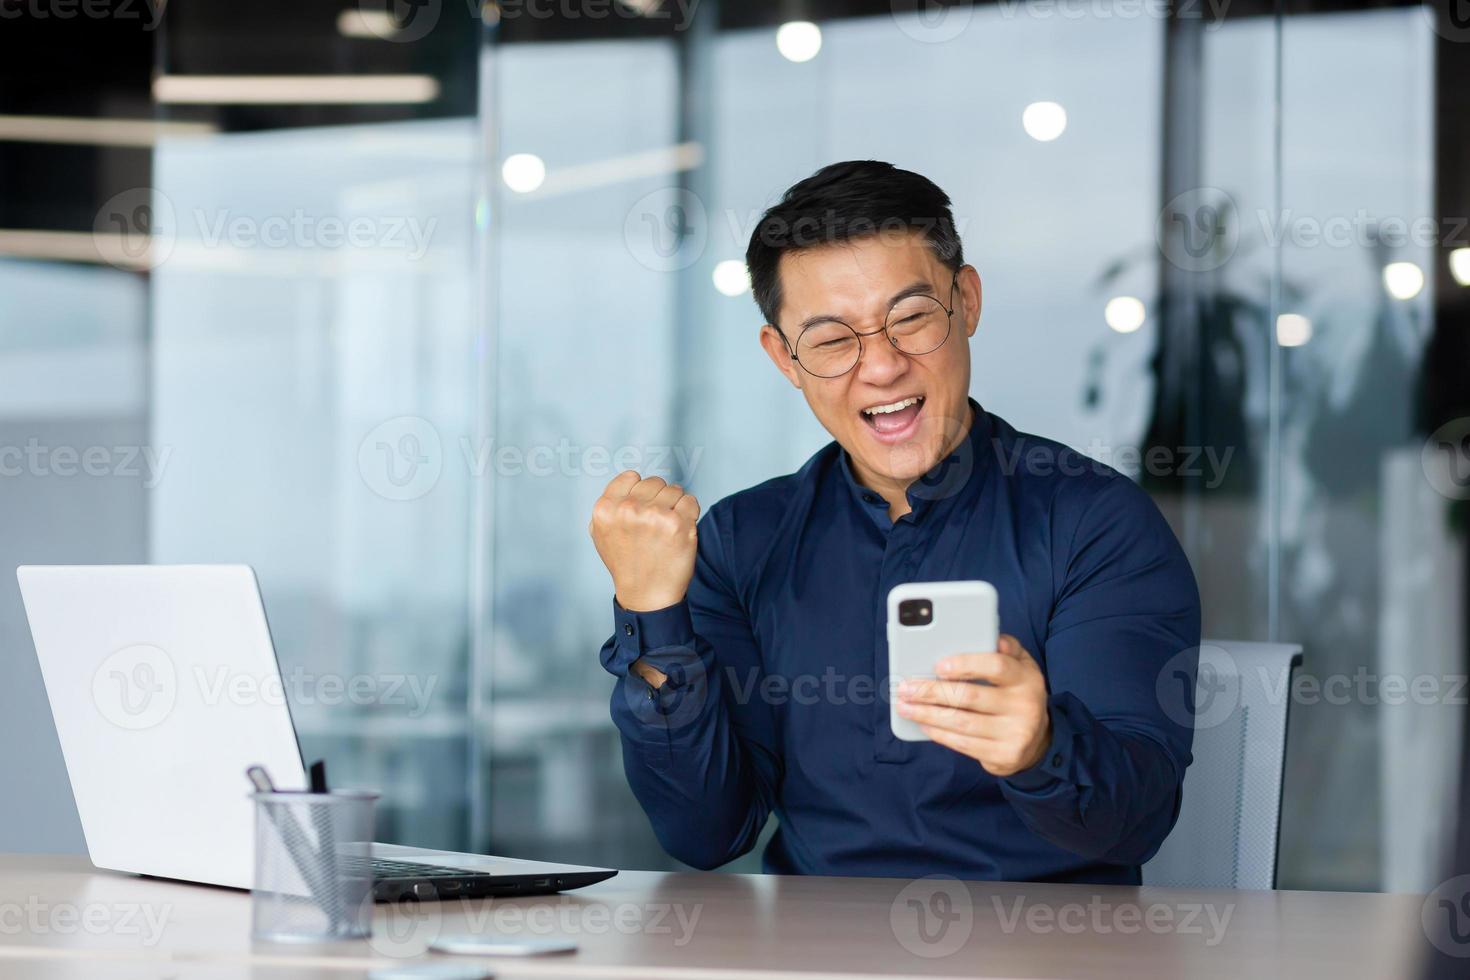 Successful asian businessman celebrating victory and happy good news notification from phone reading, man working inside office using laptop at work holding hand up triumph gesture photo